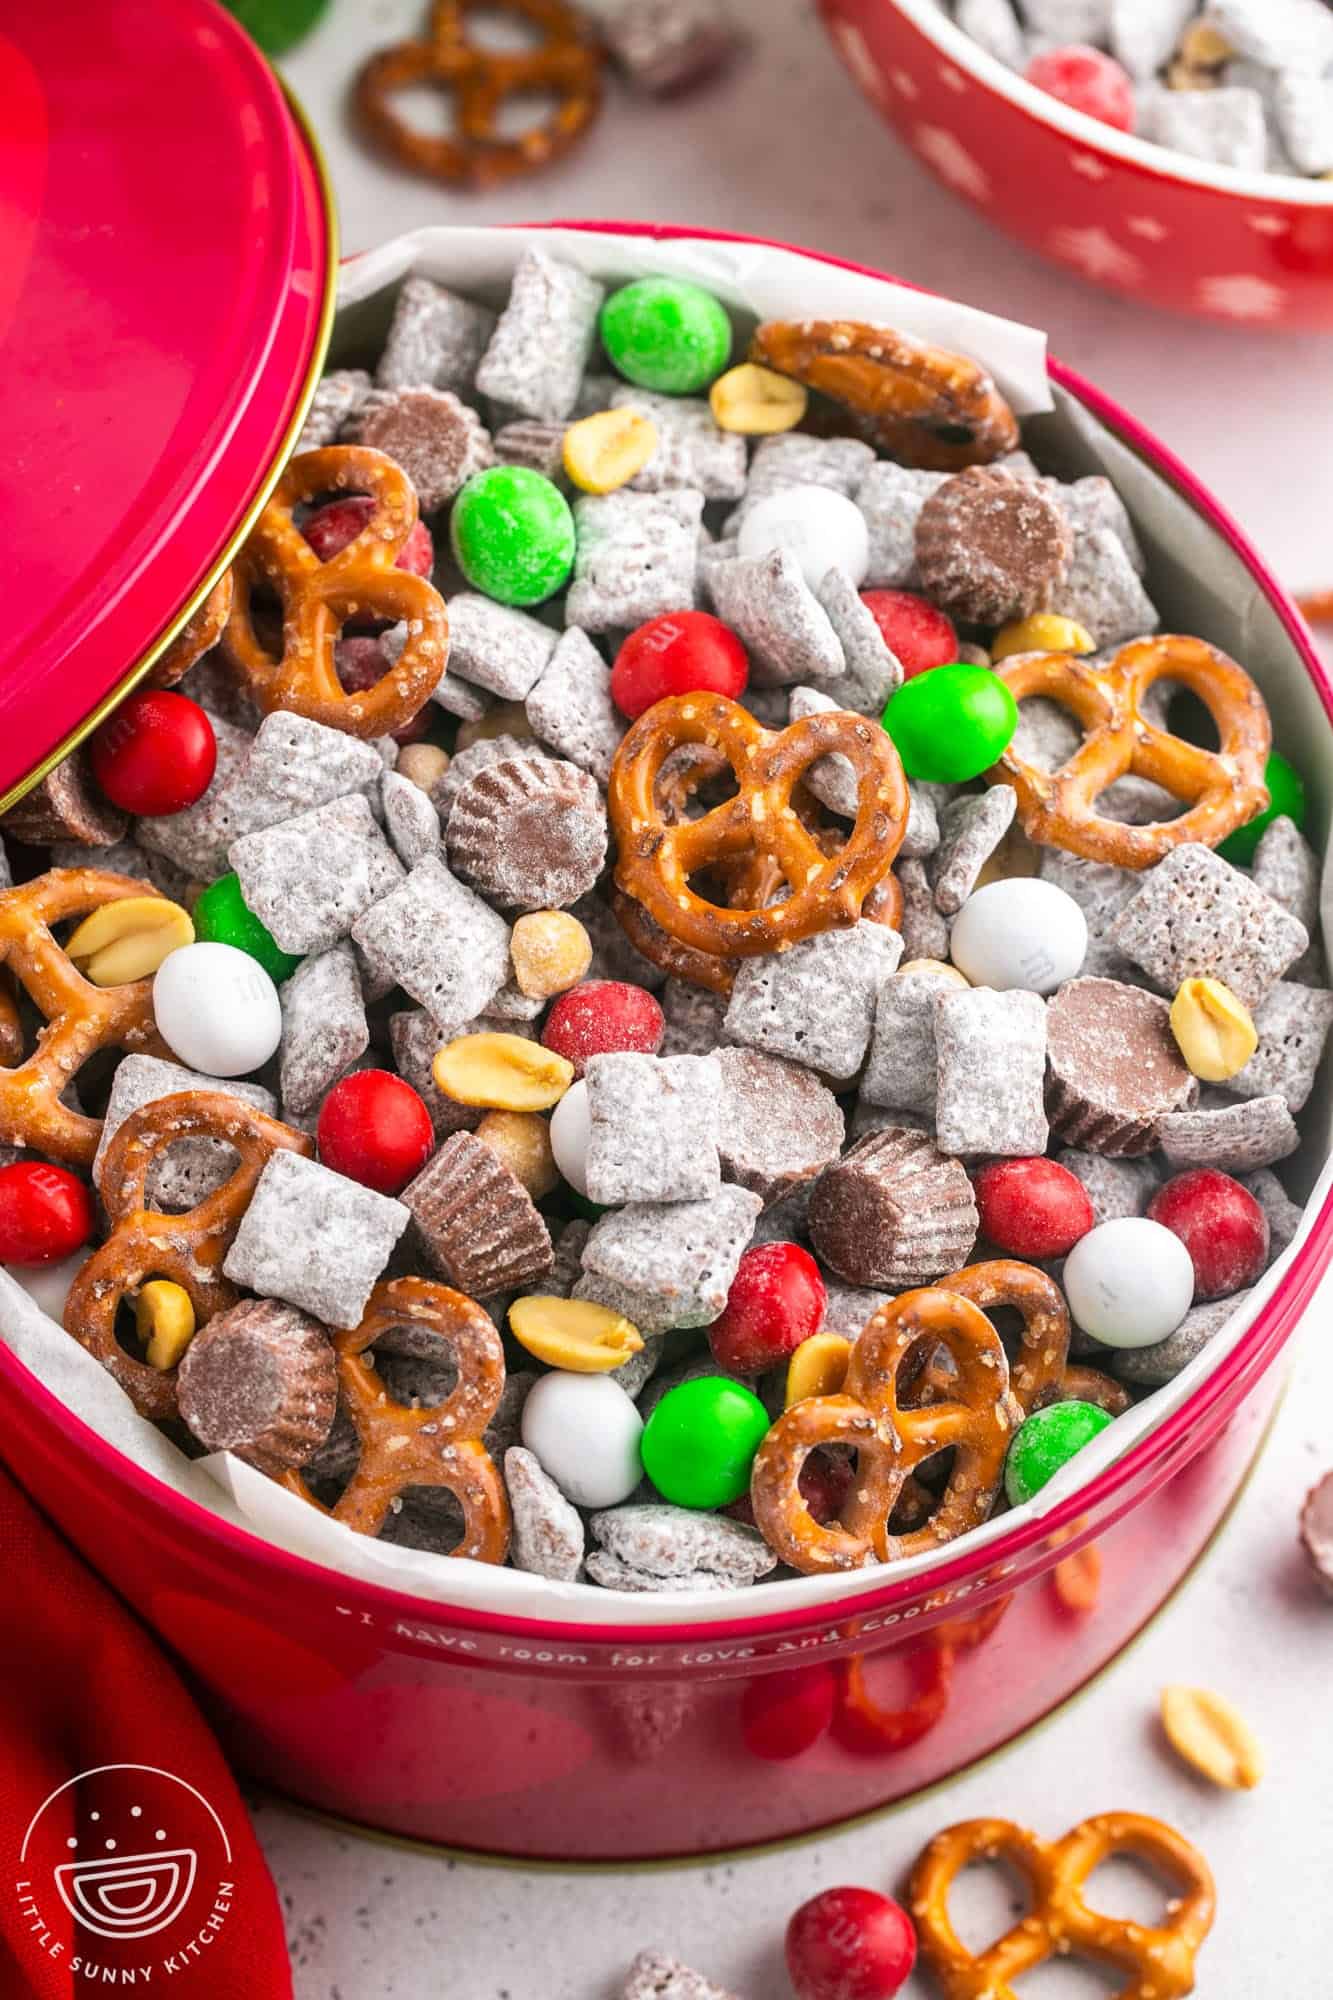 a red bowl filled with christmas puppy chow with pretzels and holiday m&ms.